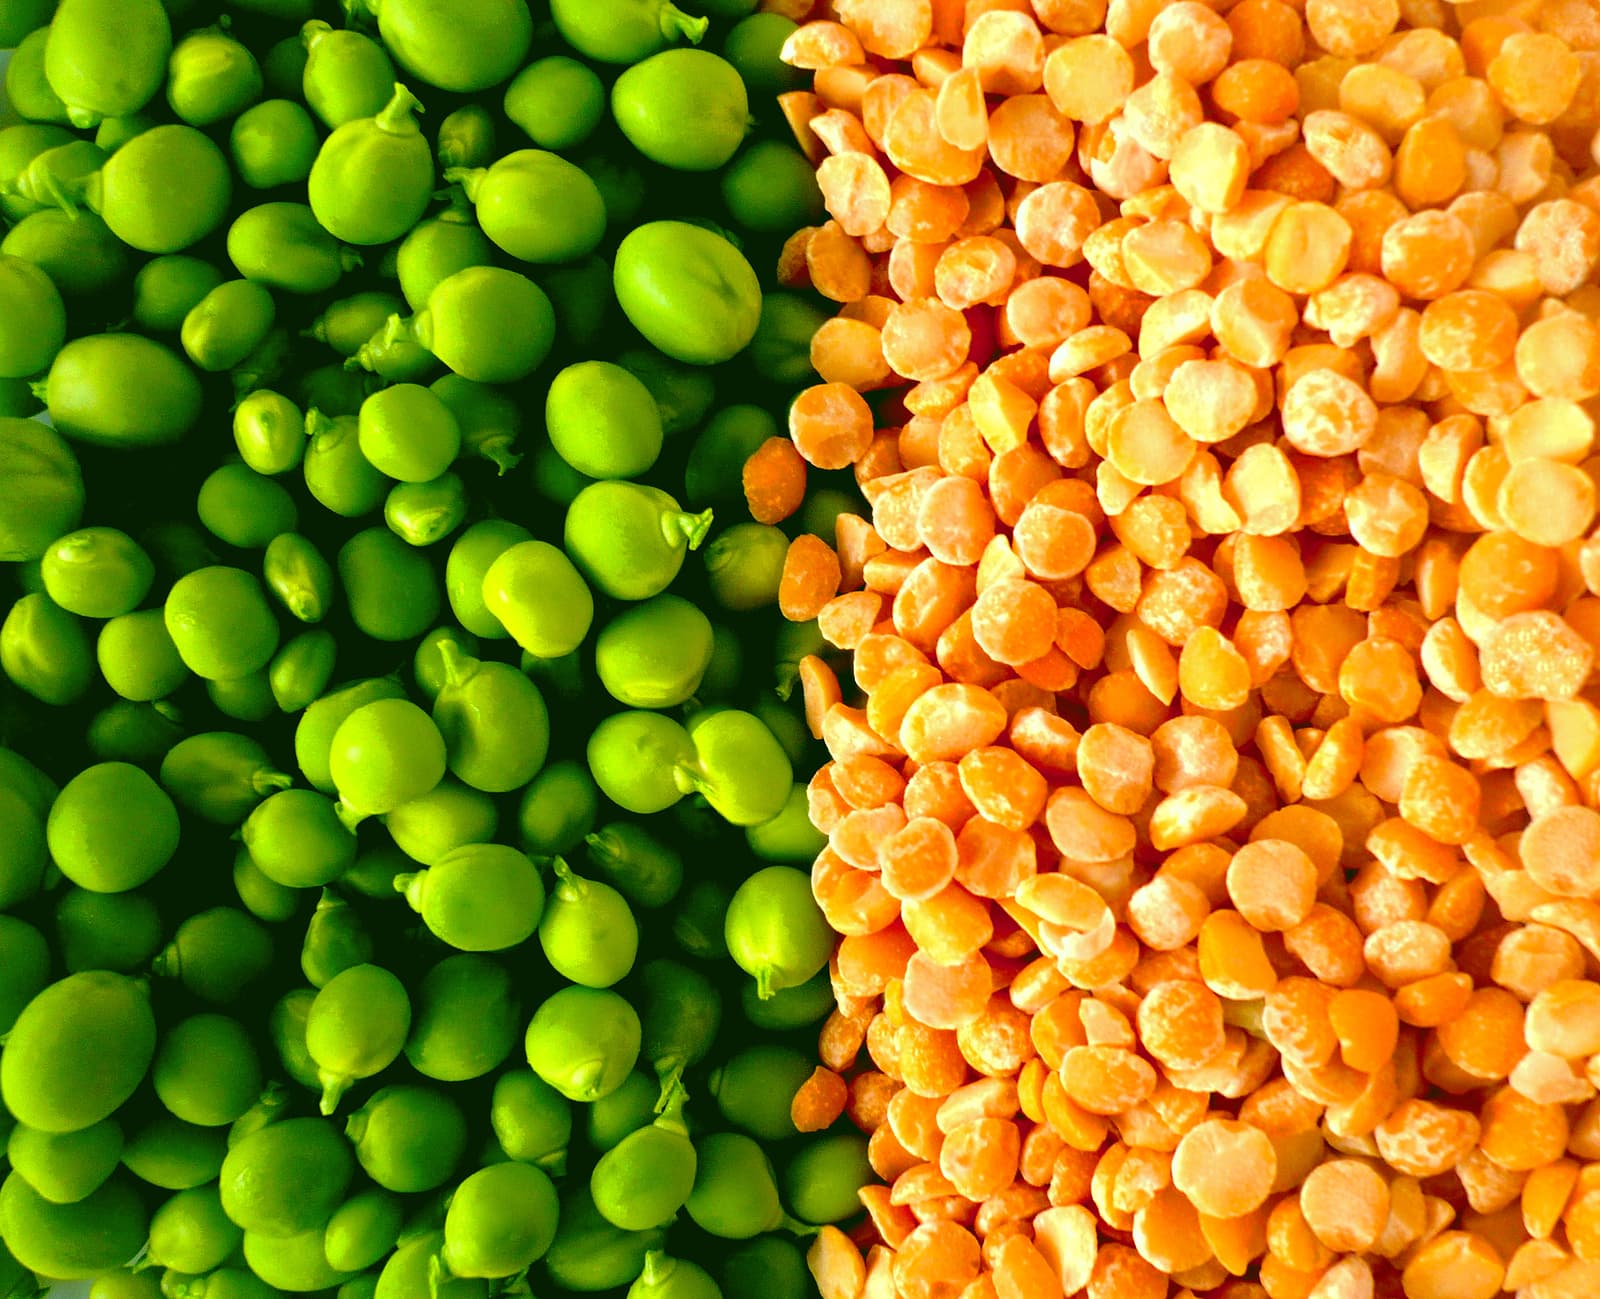 6 Unknown Pea Protein Benefits